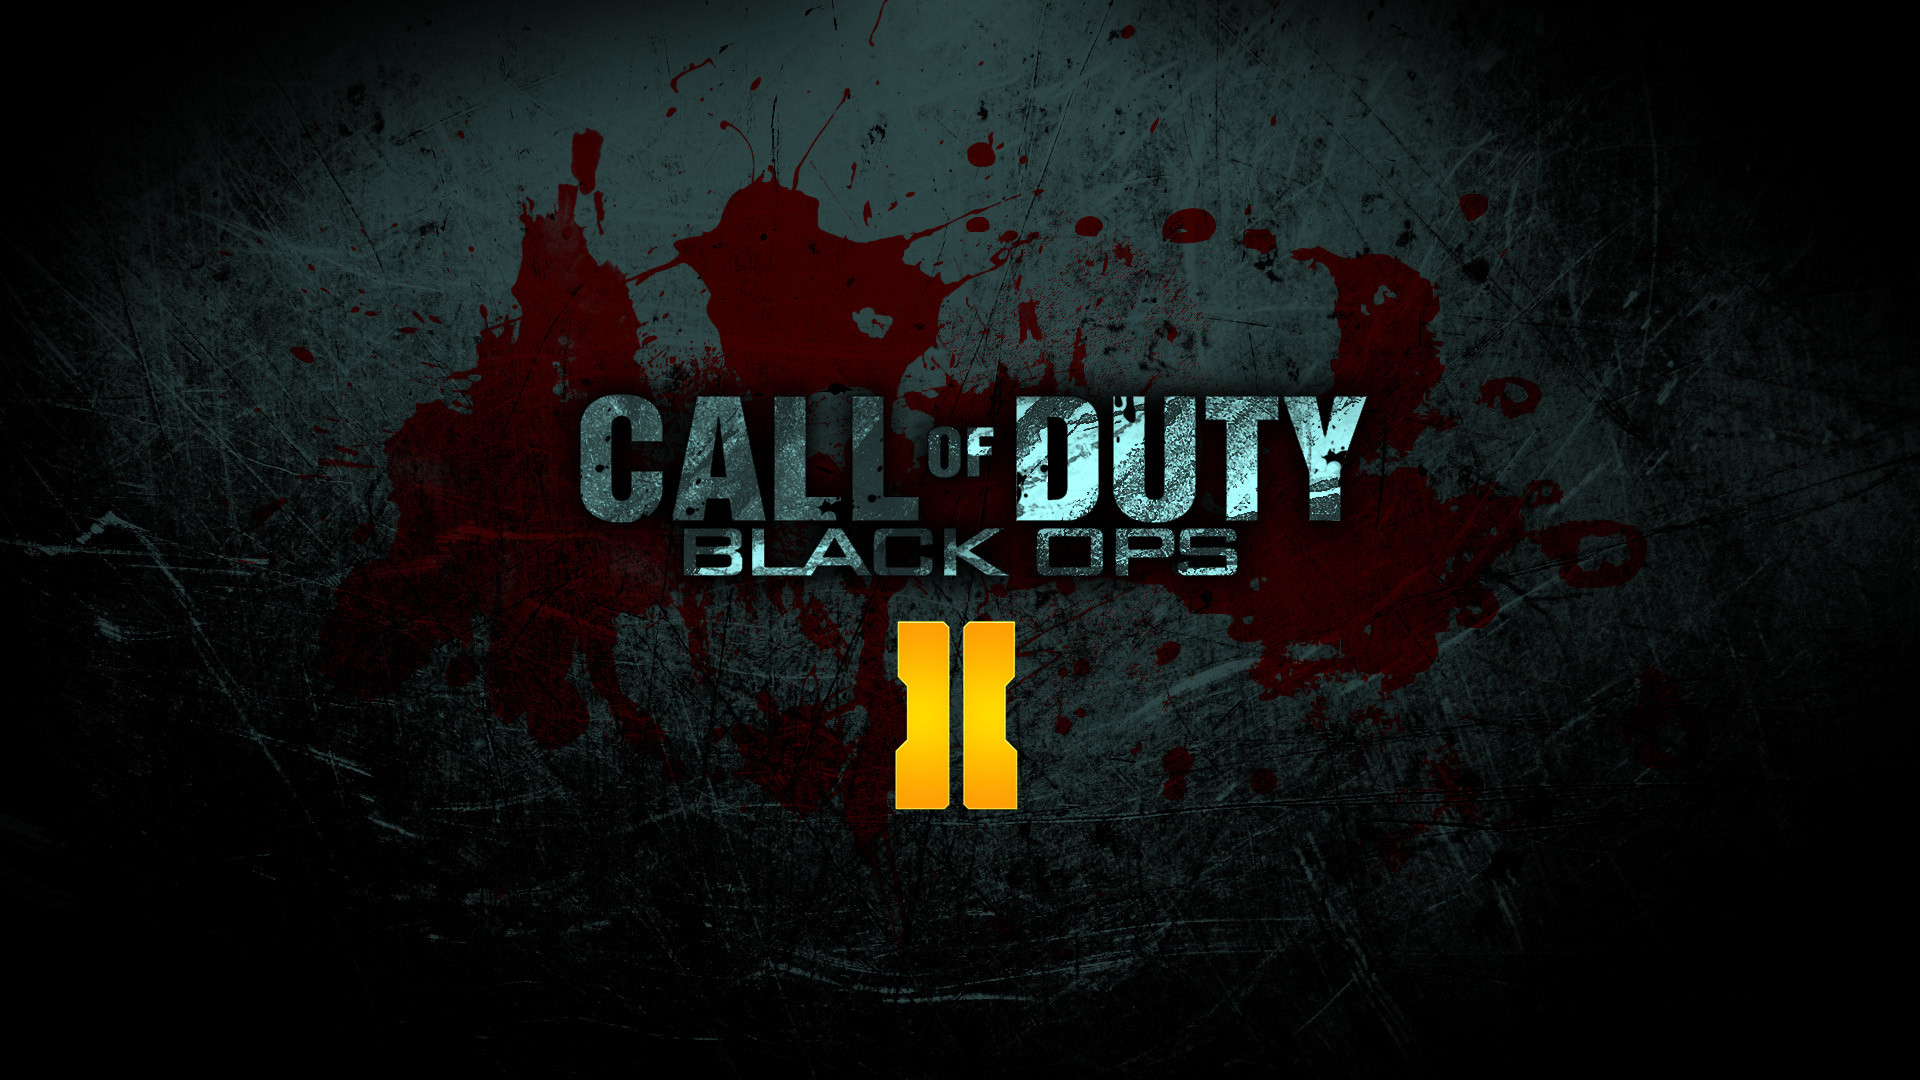 1920x1080 Of Duty Black Ops 2 Zombies Wallpaper 1080p Be back in black ops 2 as